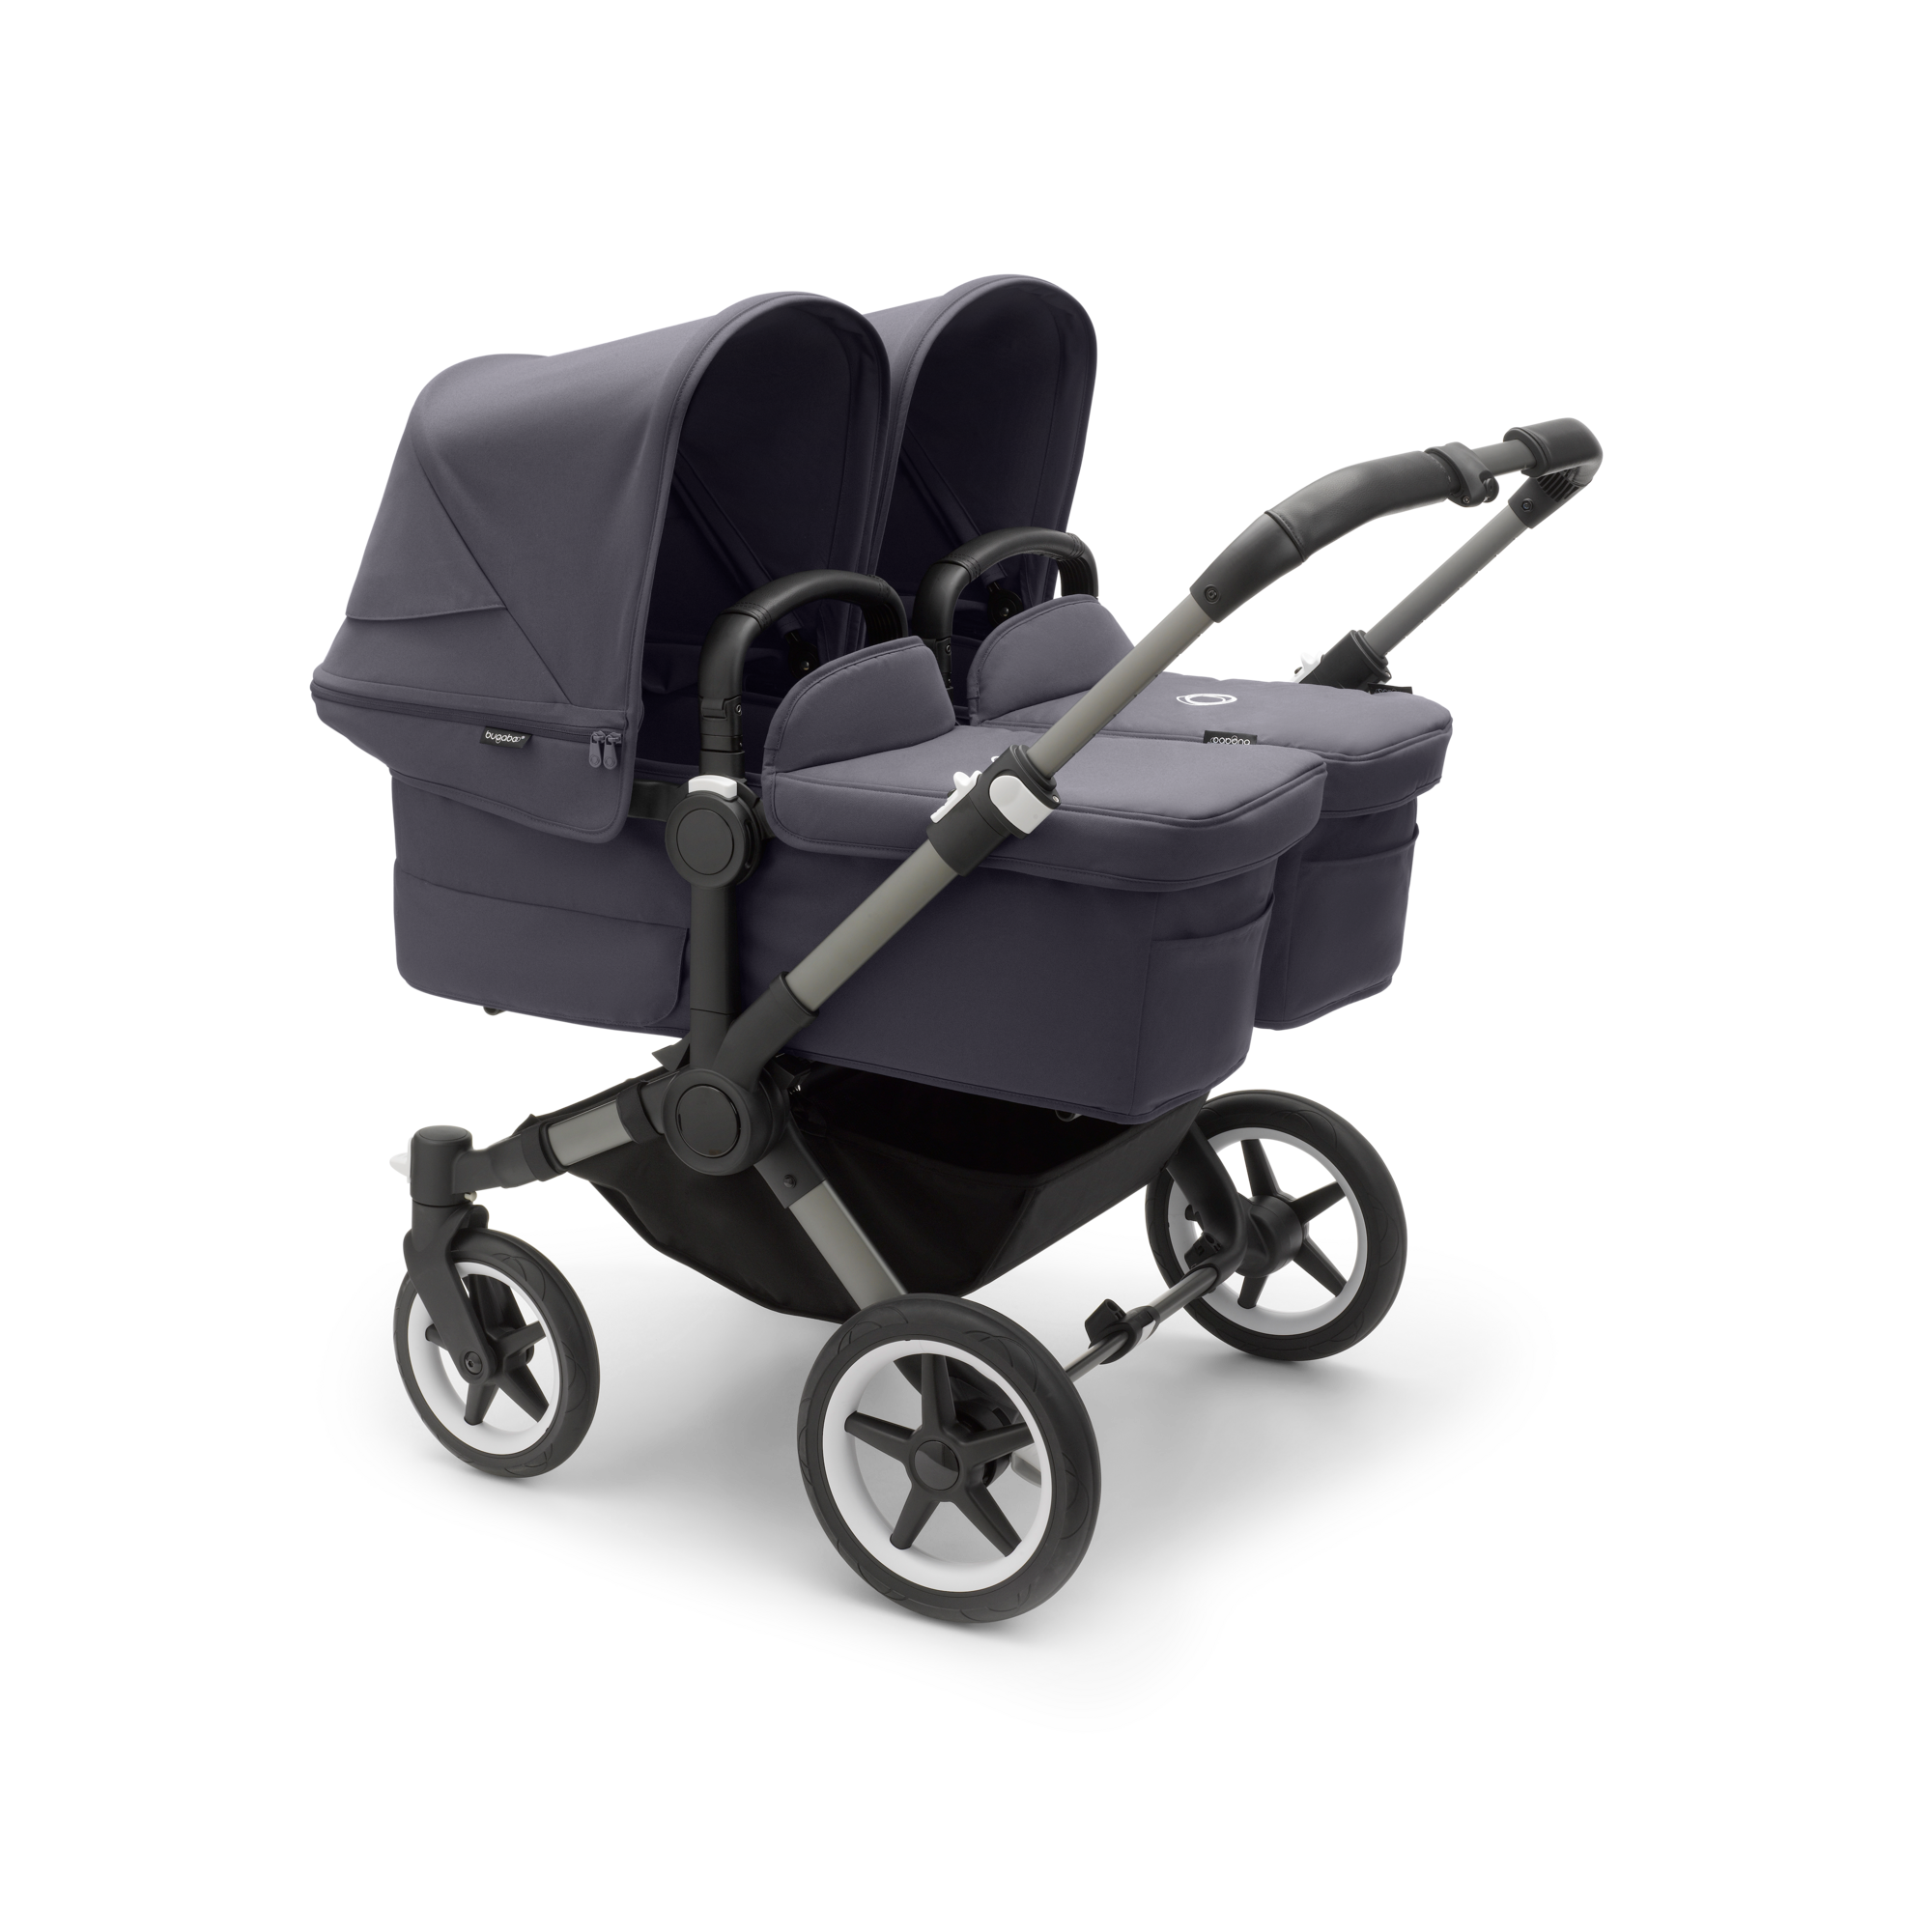 Bugaboo  Bugaboo Donkey 5 Twin bassinet and seat stroller graphite base stormy blue fabrics stormy blue sun canopy